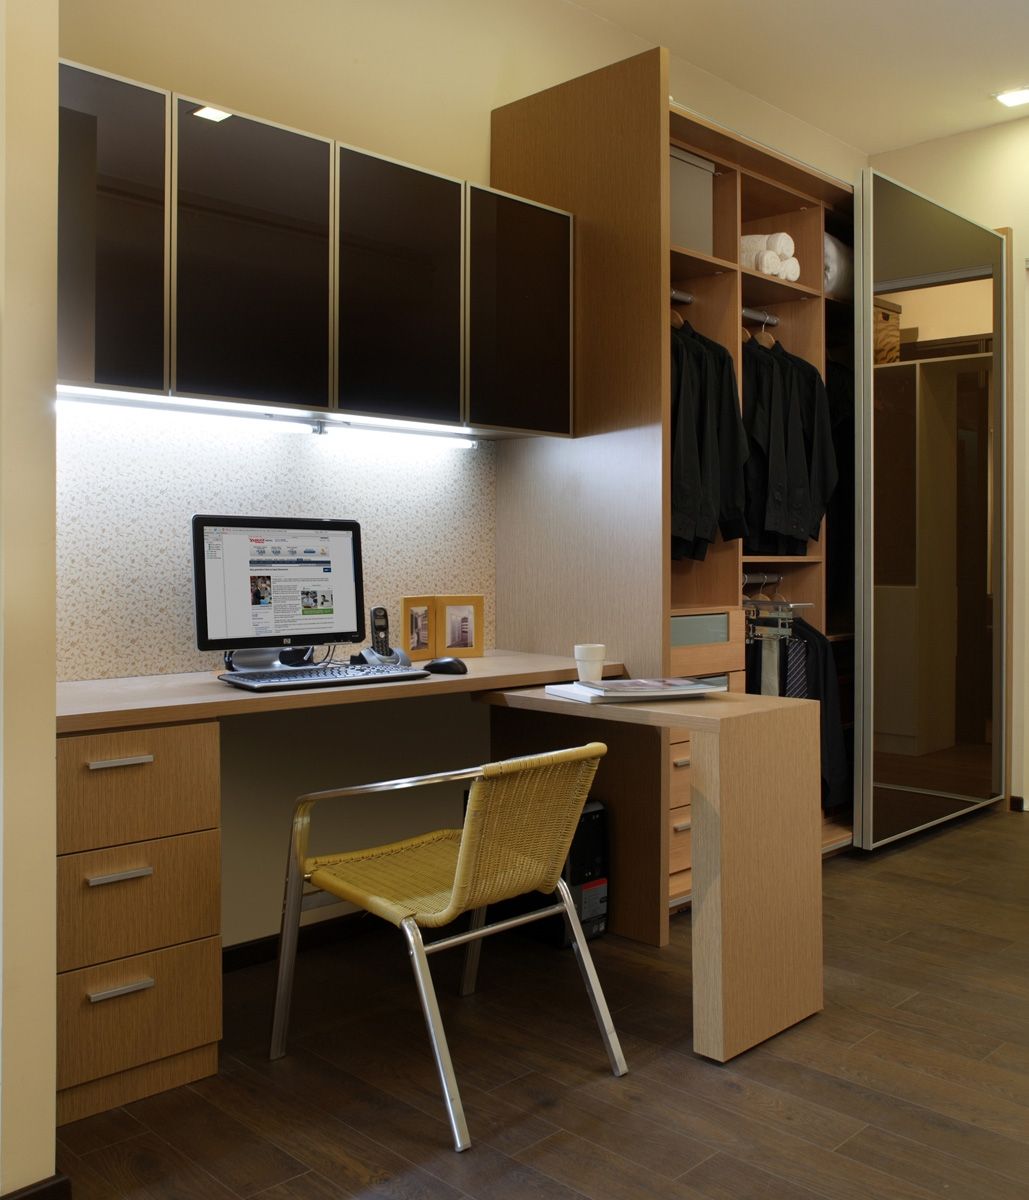 Study Table With Wall Cabinet Wardrobe Our Showroom Pinterest Intended For Study Cupboards (View 4 of 12)